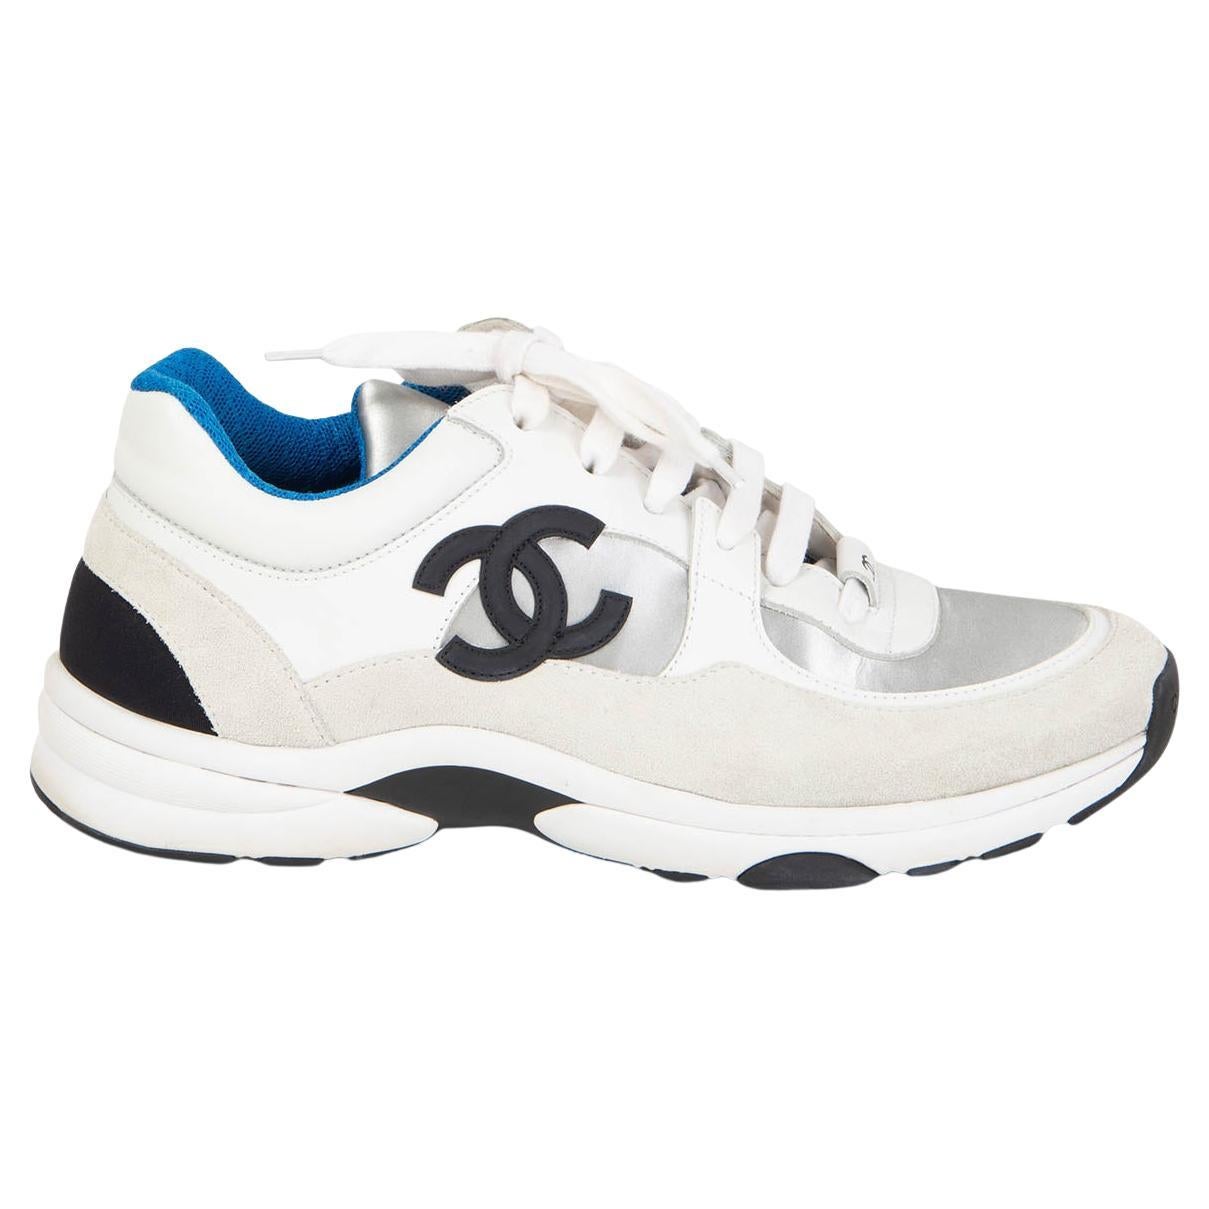 CHANEL white silver blue leather 2018 18S LOW TOP Sneakers Shoes